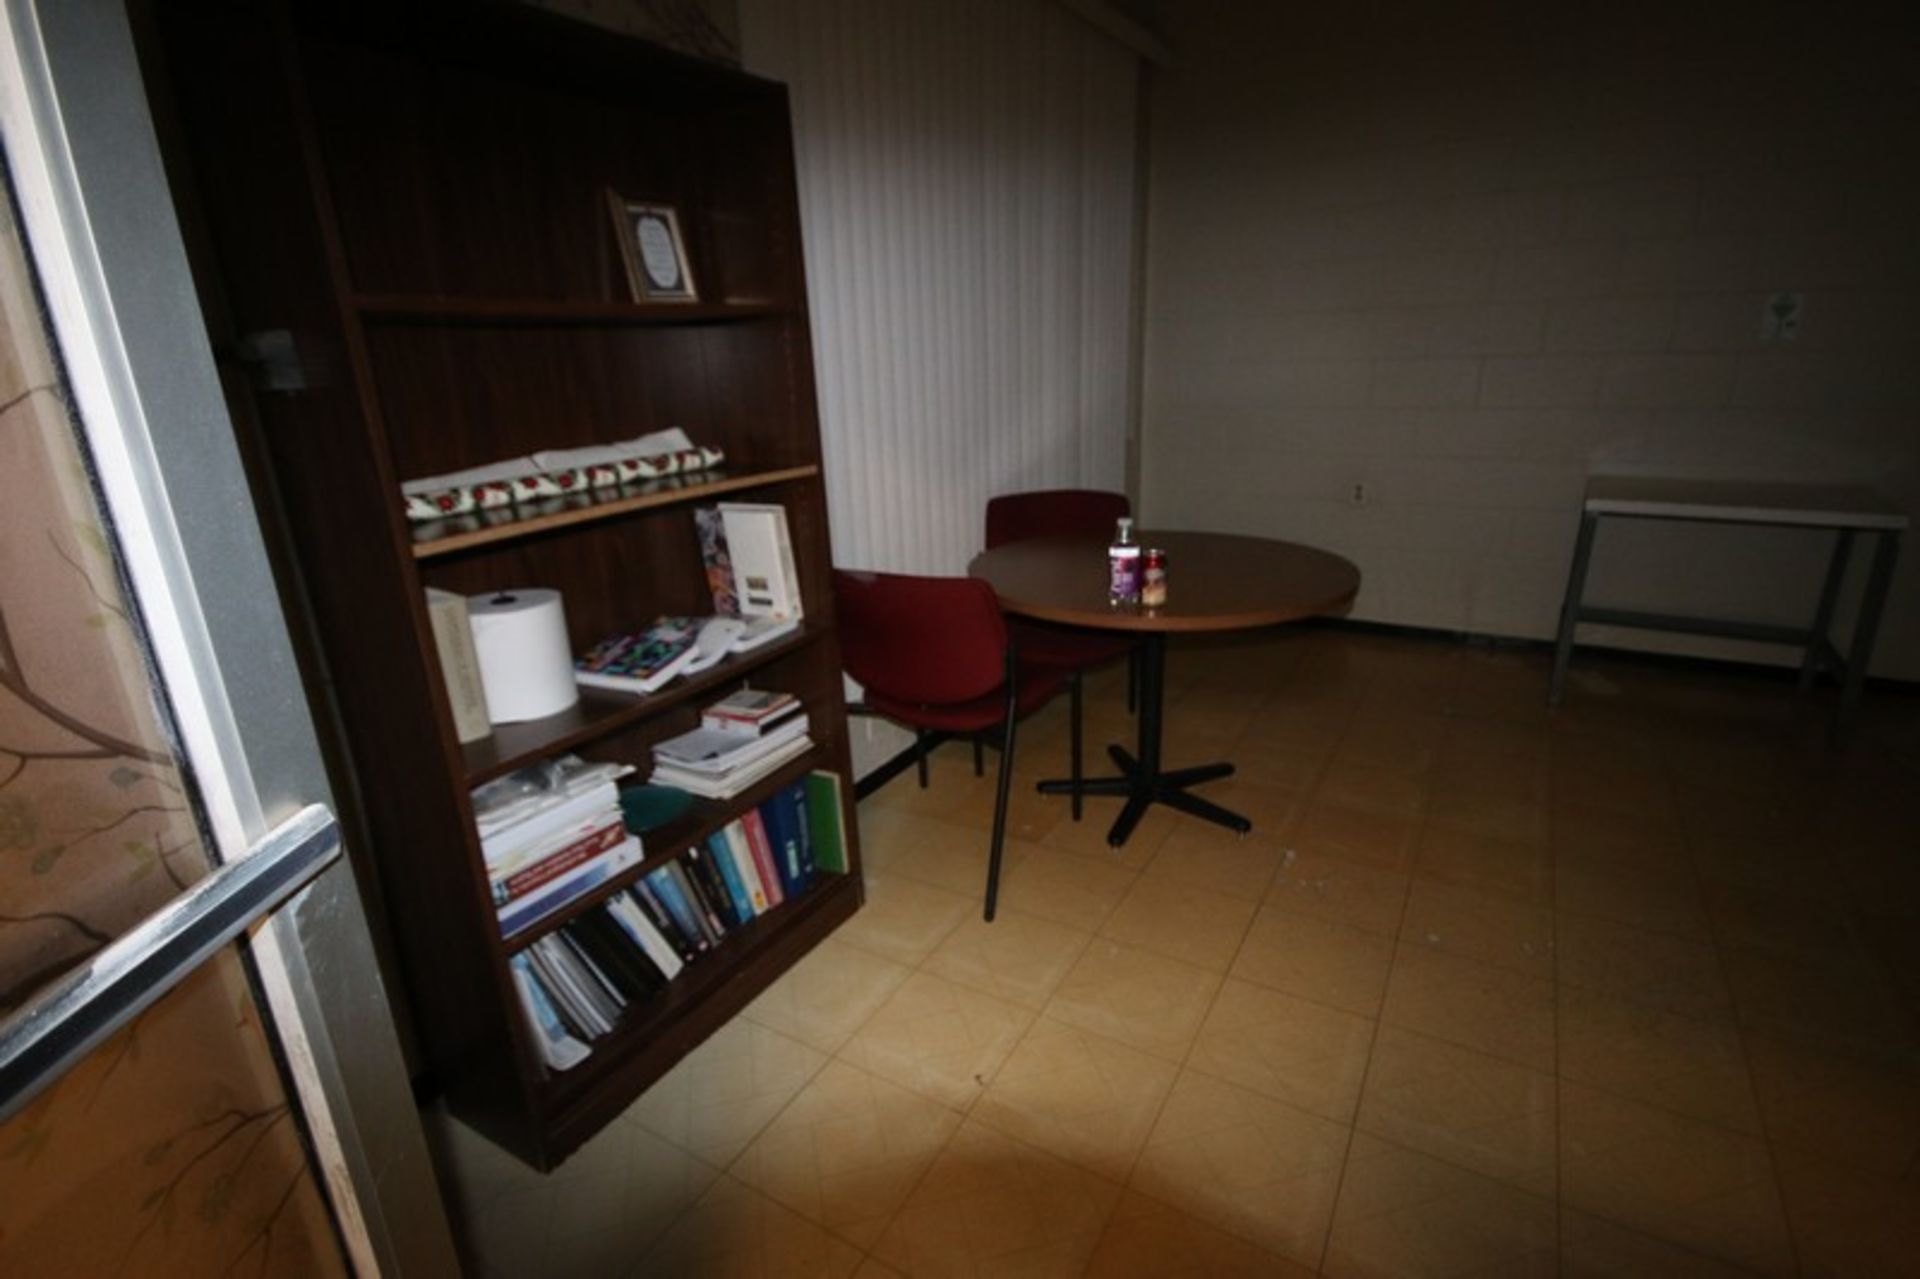 Contents of (2) Rooms, Includes Office Furniture & Break Room Furniture & Other Contents As